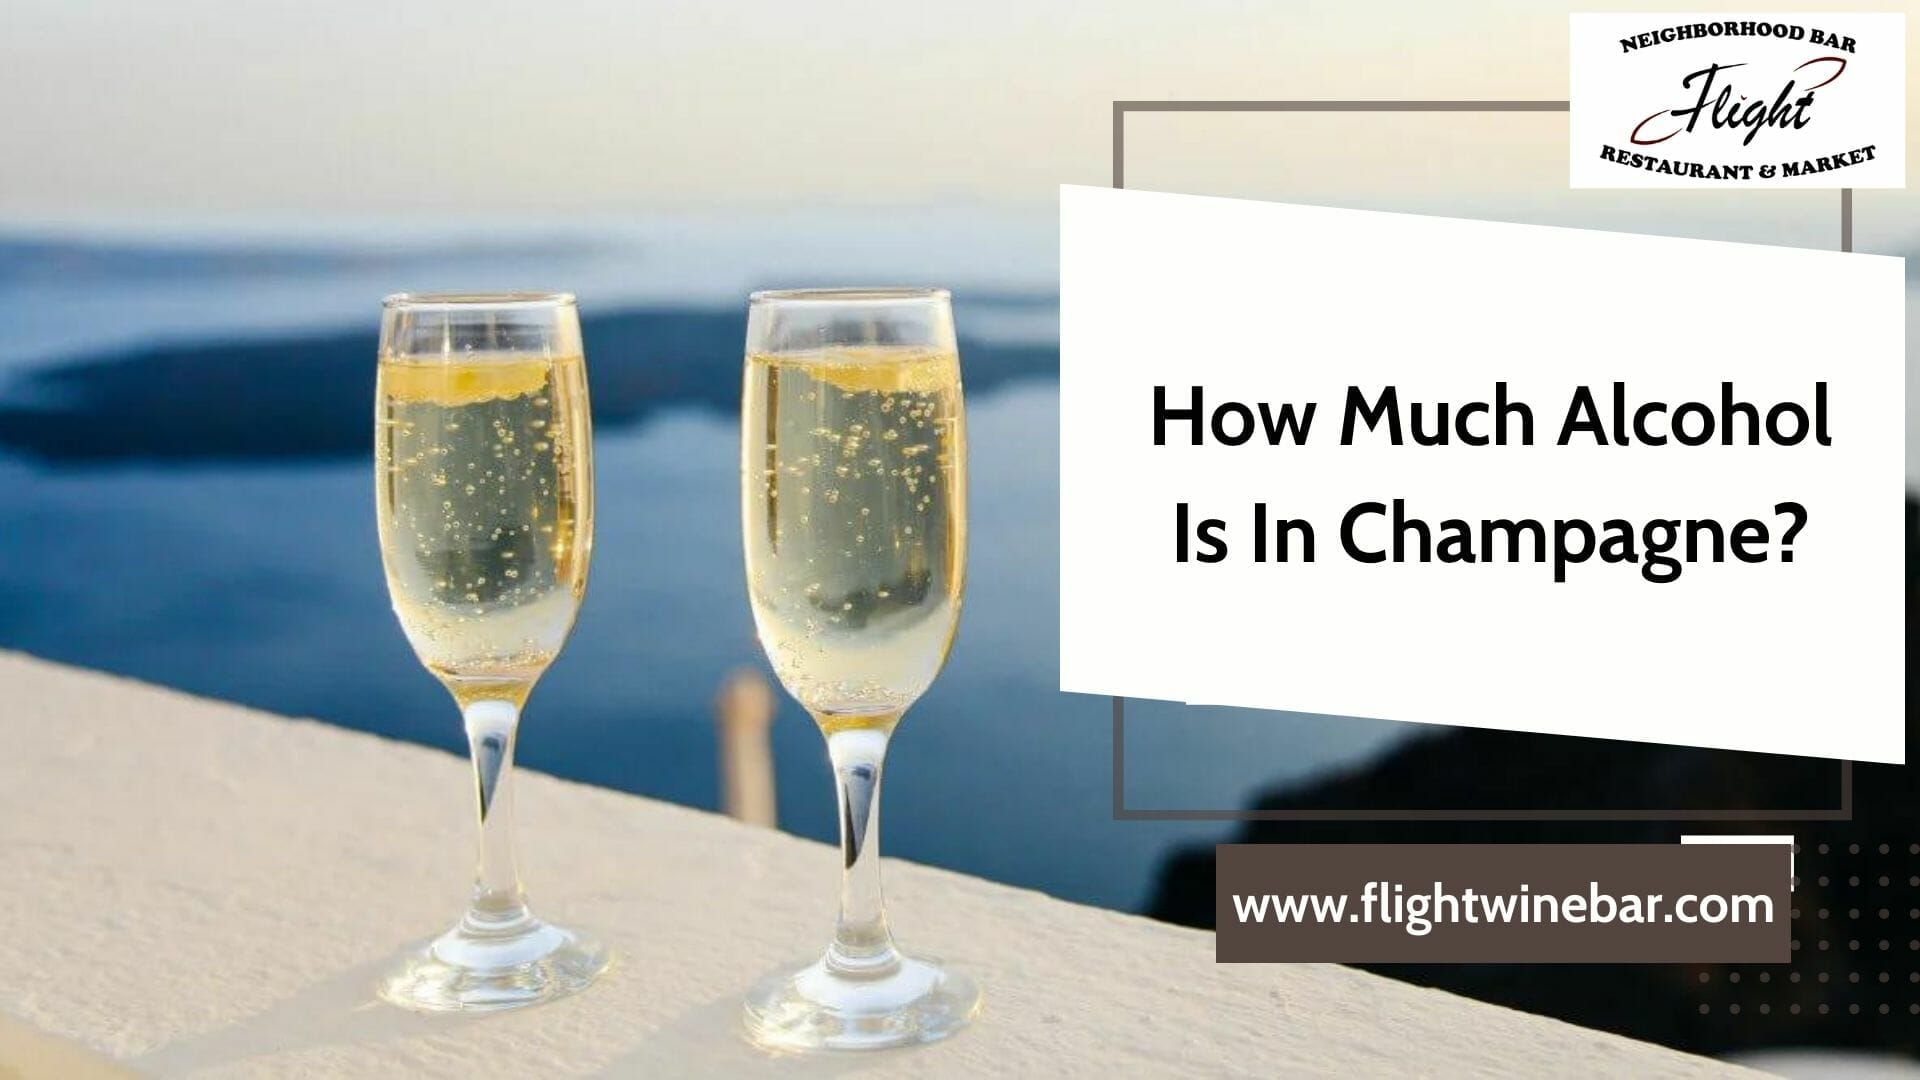 How Much Alcohol Is In Champagne